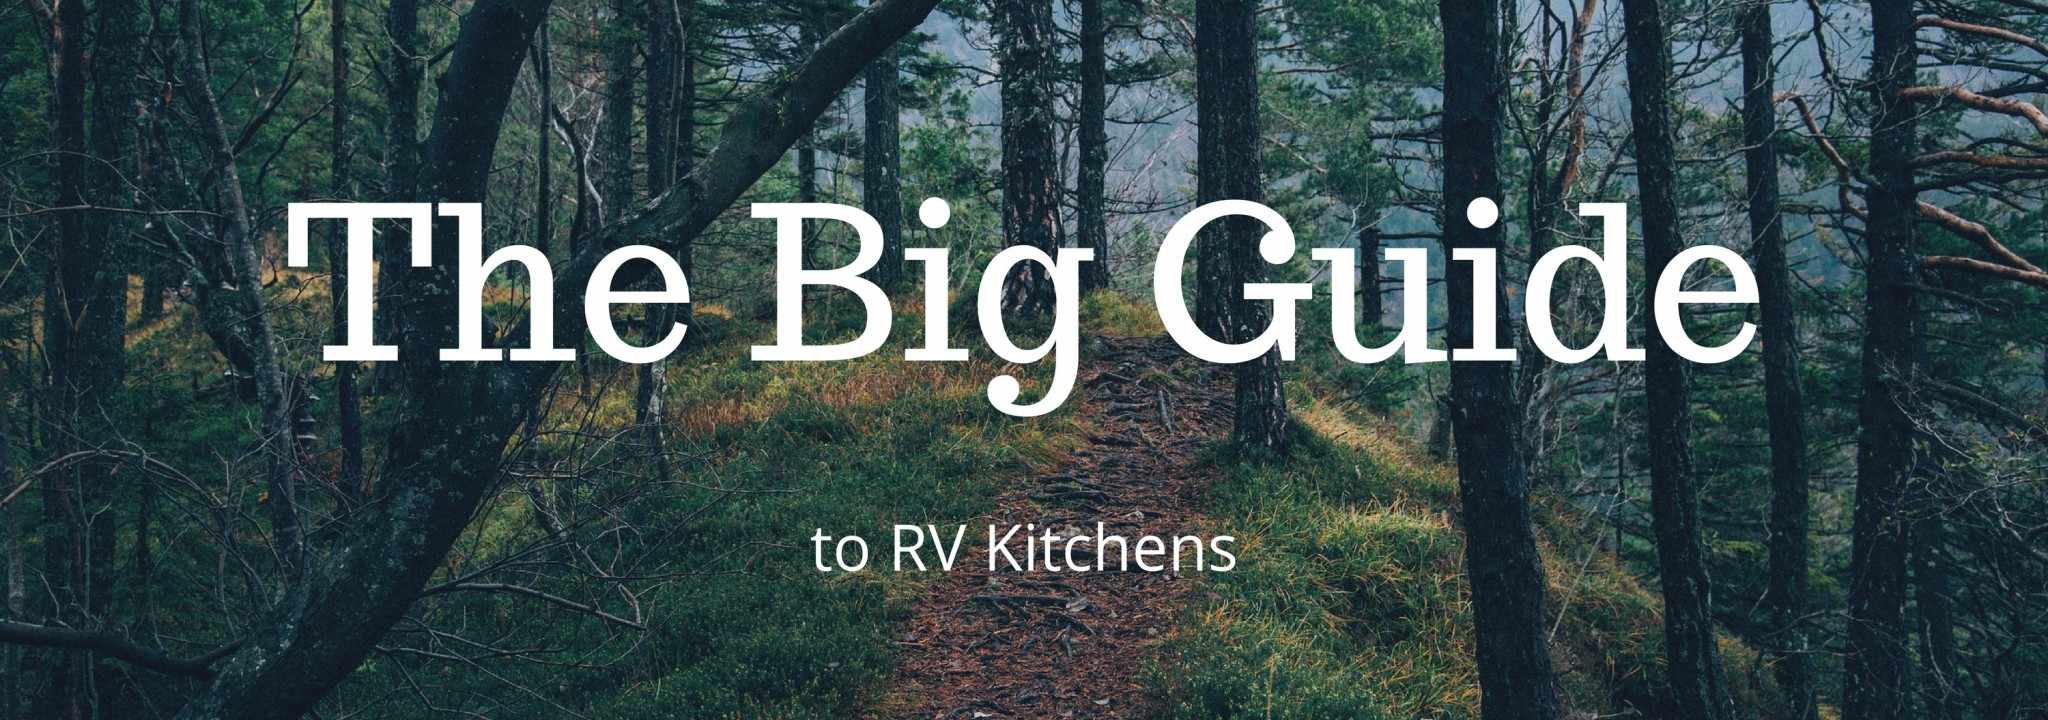 The Big Guide to RV Kitchens